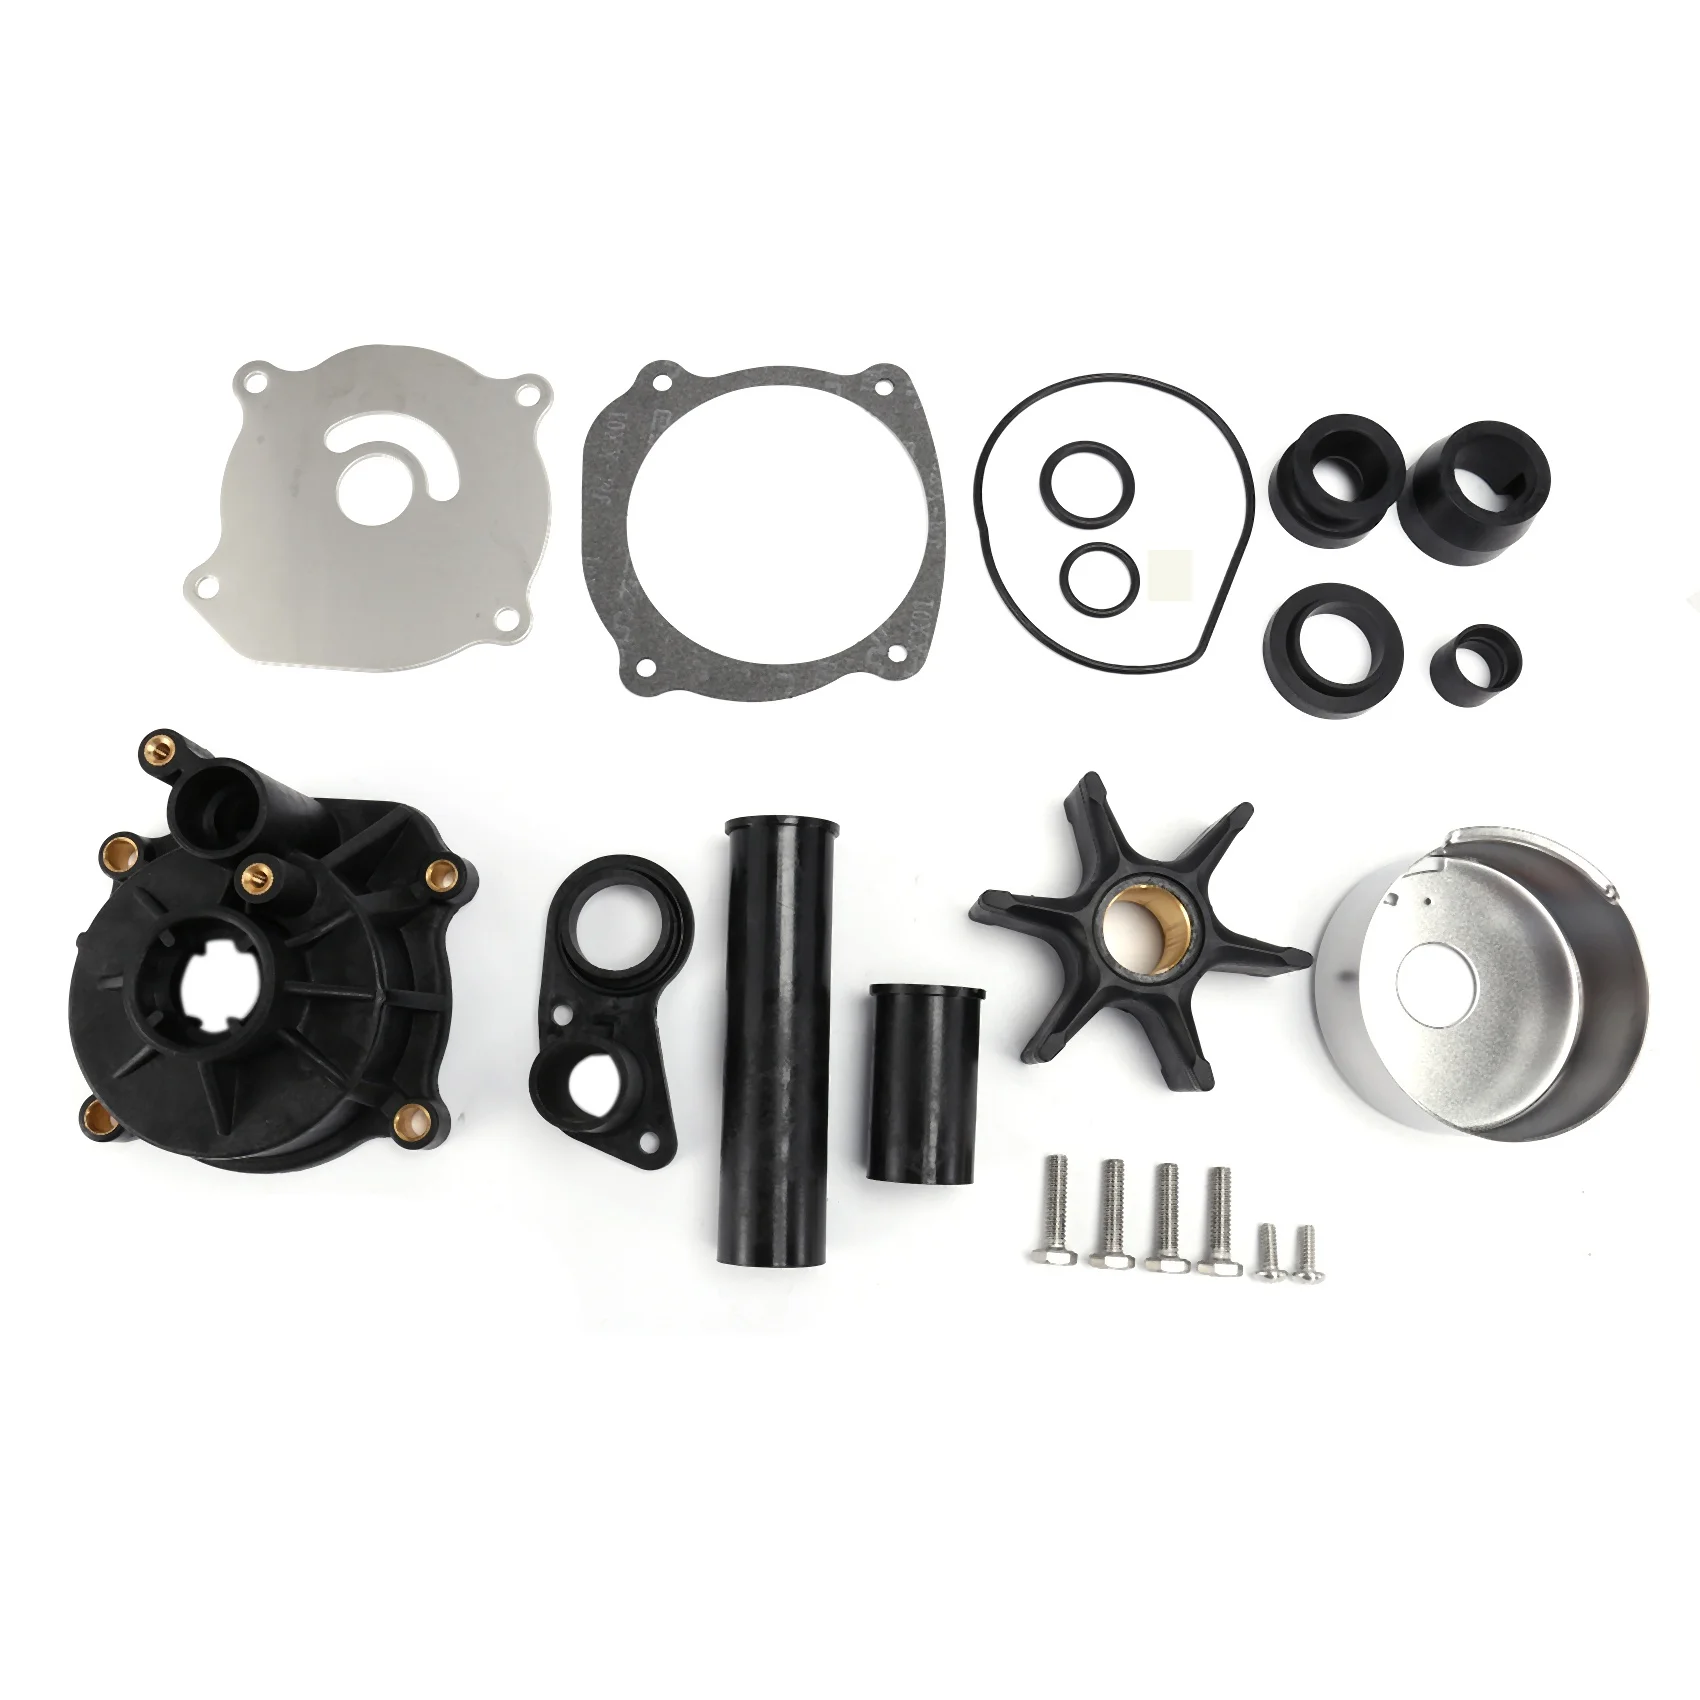 

Water Pump Repair Kit Replacement for Johnson Evinrude V4 V6 V8 85-300HP Outboard Motor Parts 5001595